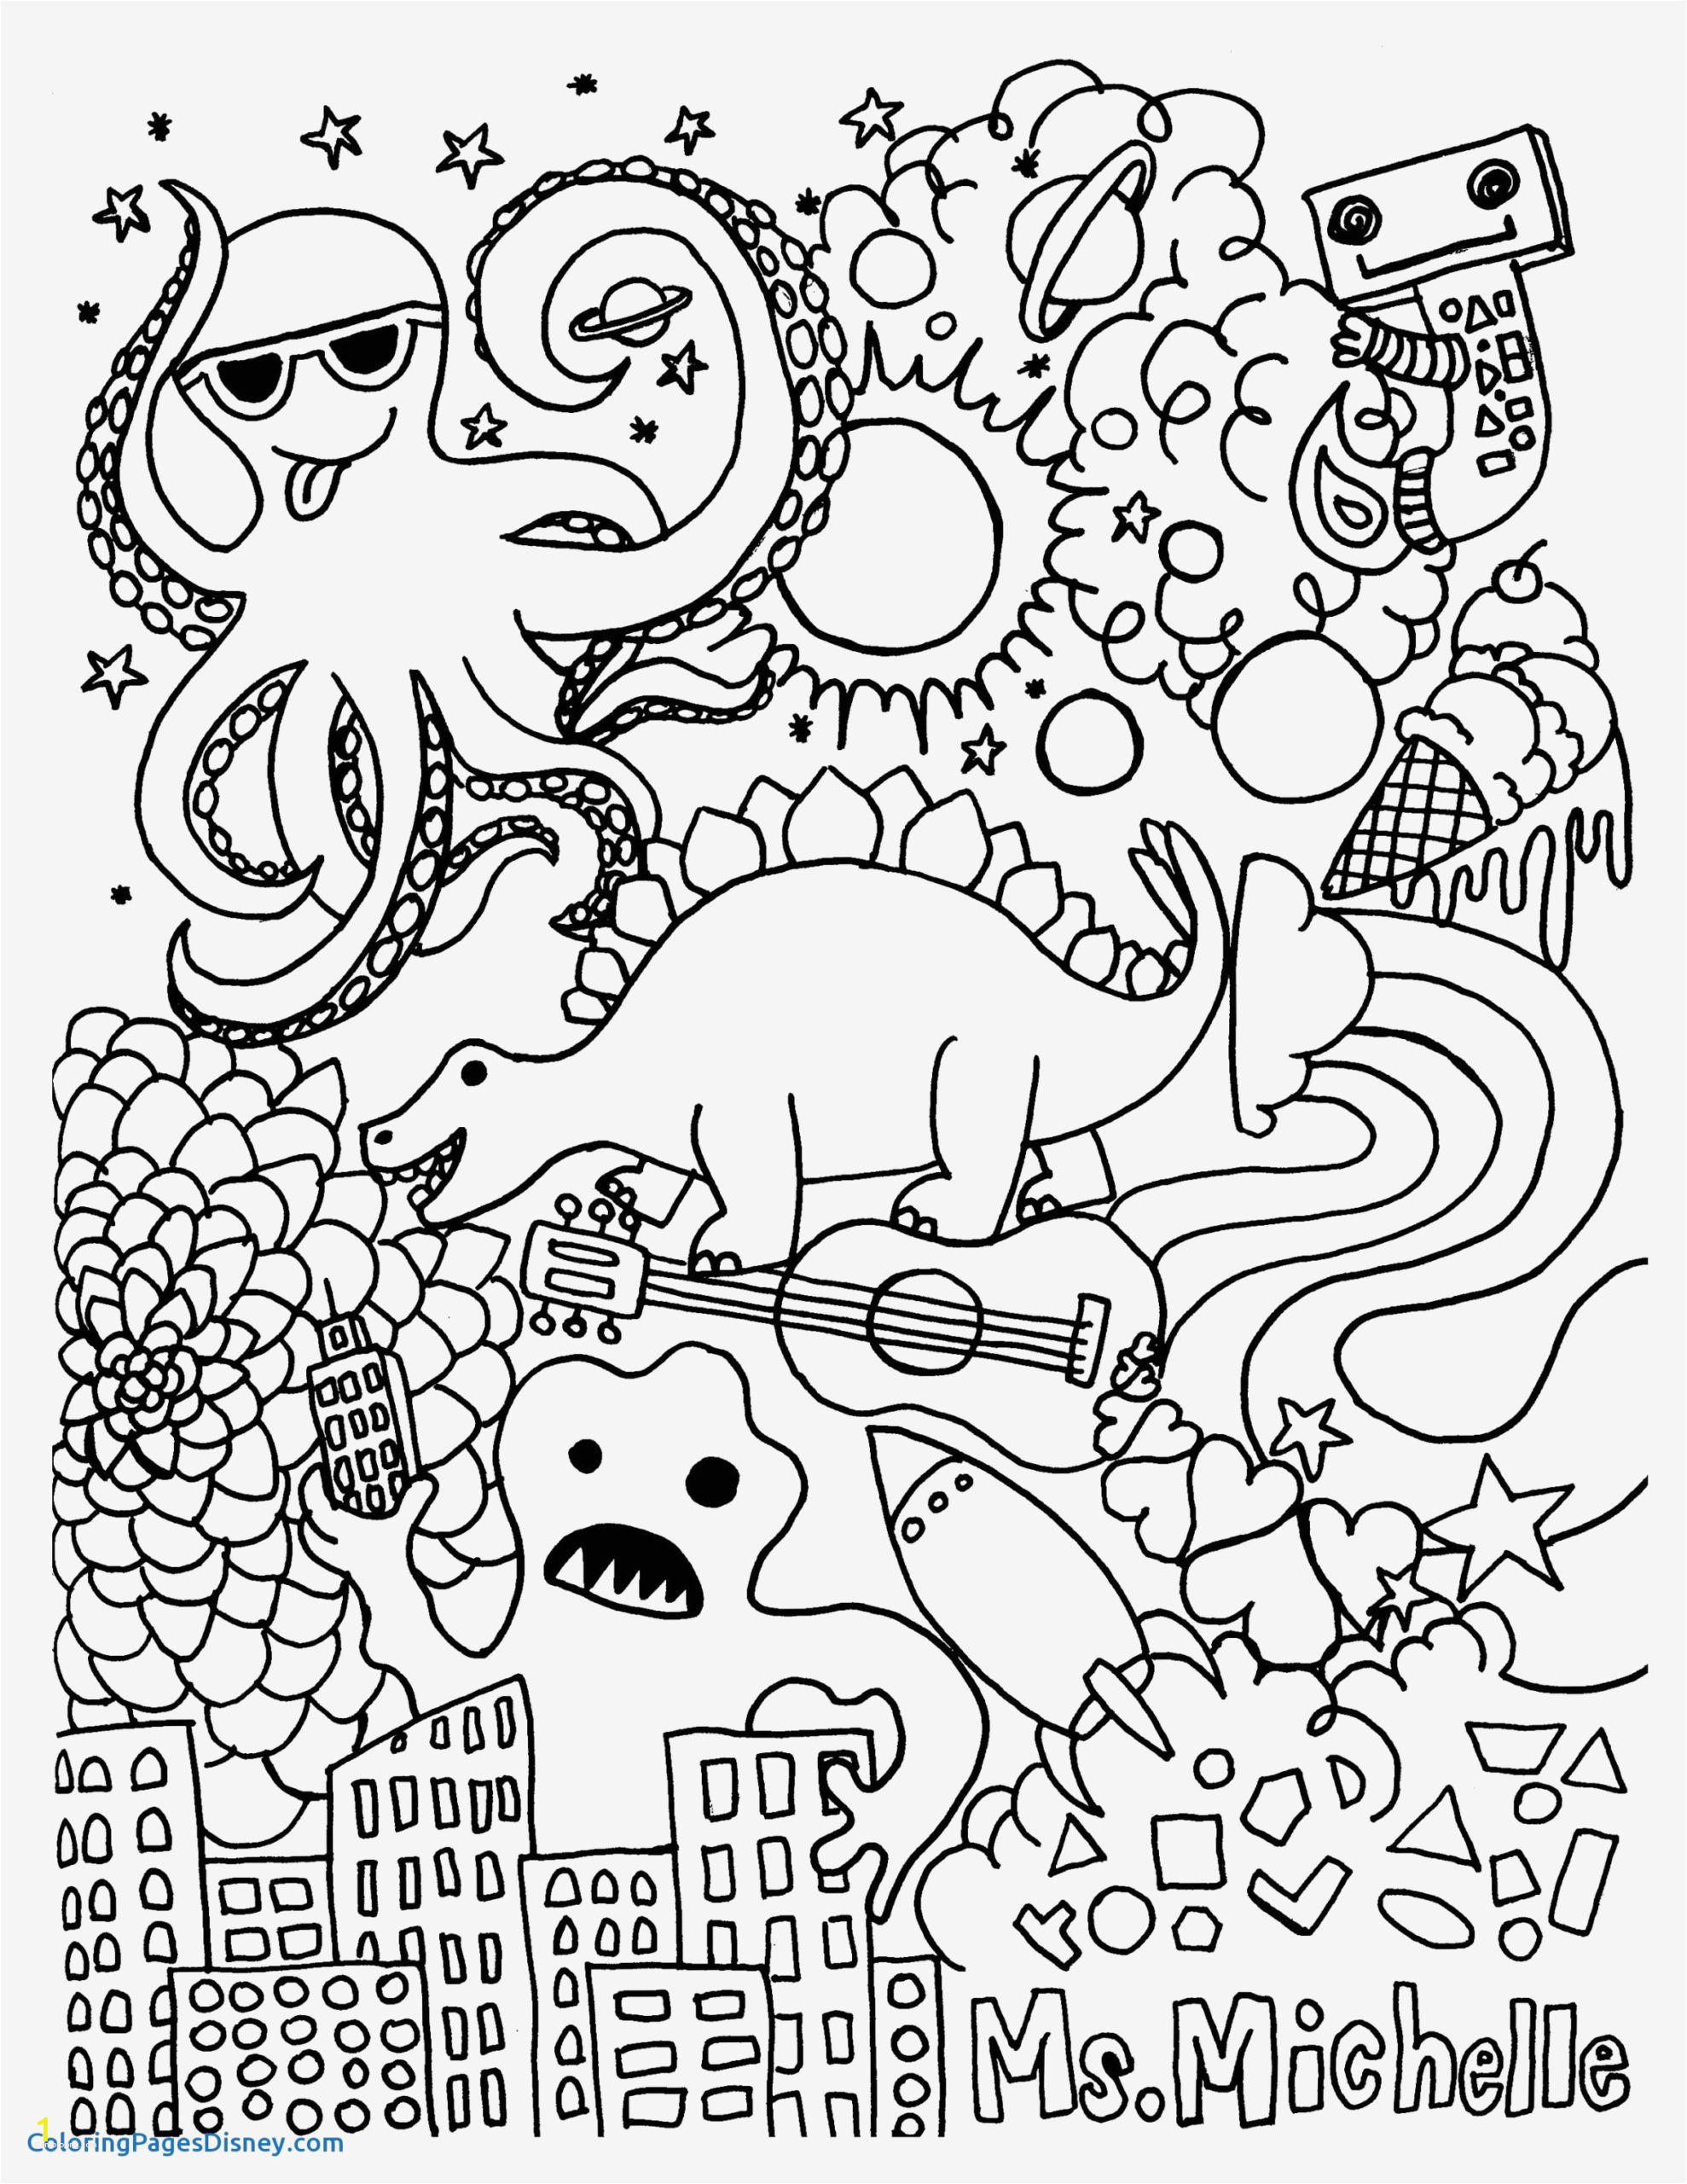 printable coloring pages for toddlers beautiful coloring book coloring book most exemplary starbucks pages of printable coloring pages for toddlers